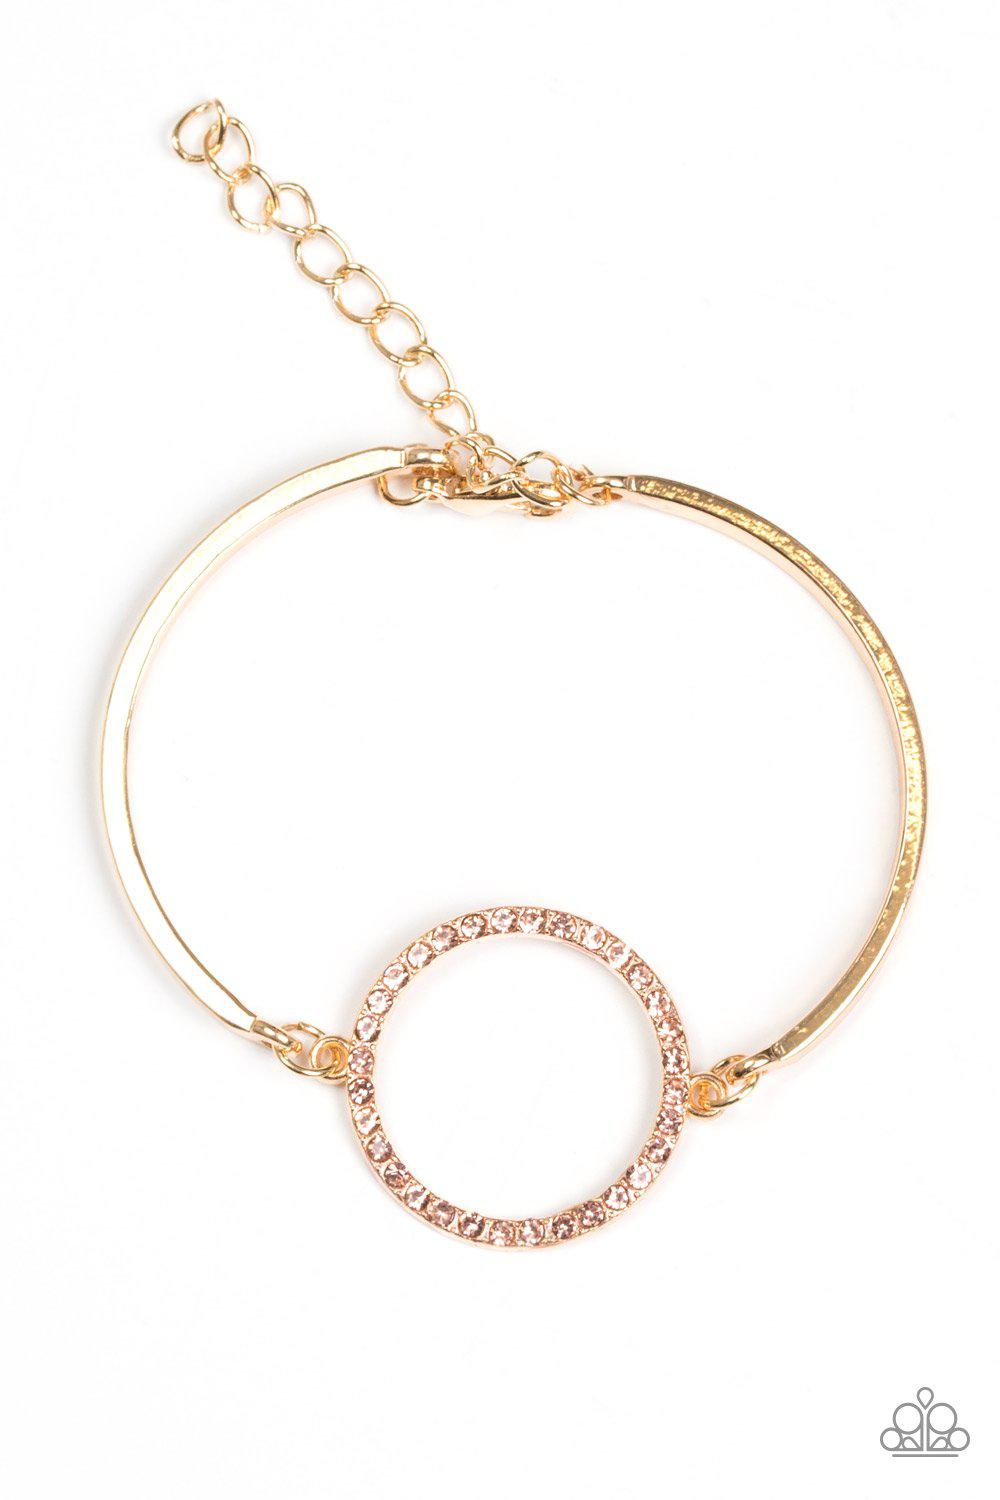 Center of Couture Gold Bracelet - Paparazzi Accessories-CarasShop.com - $5 Jewelry by Cara Jewels